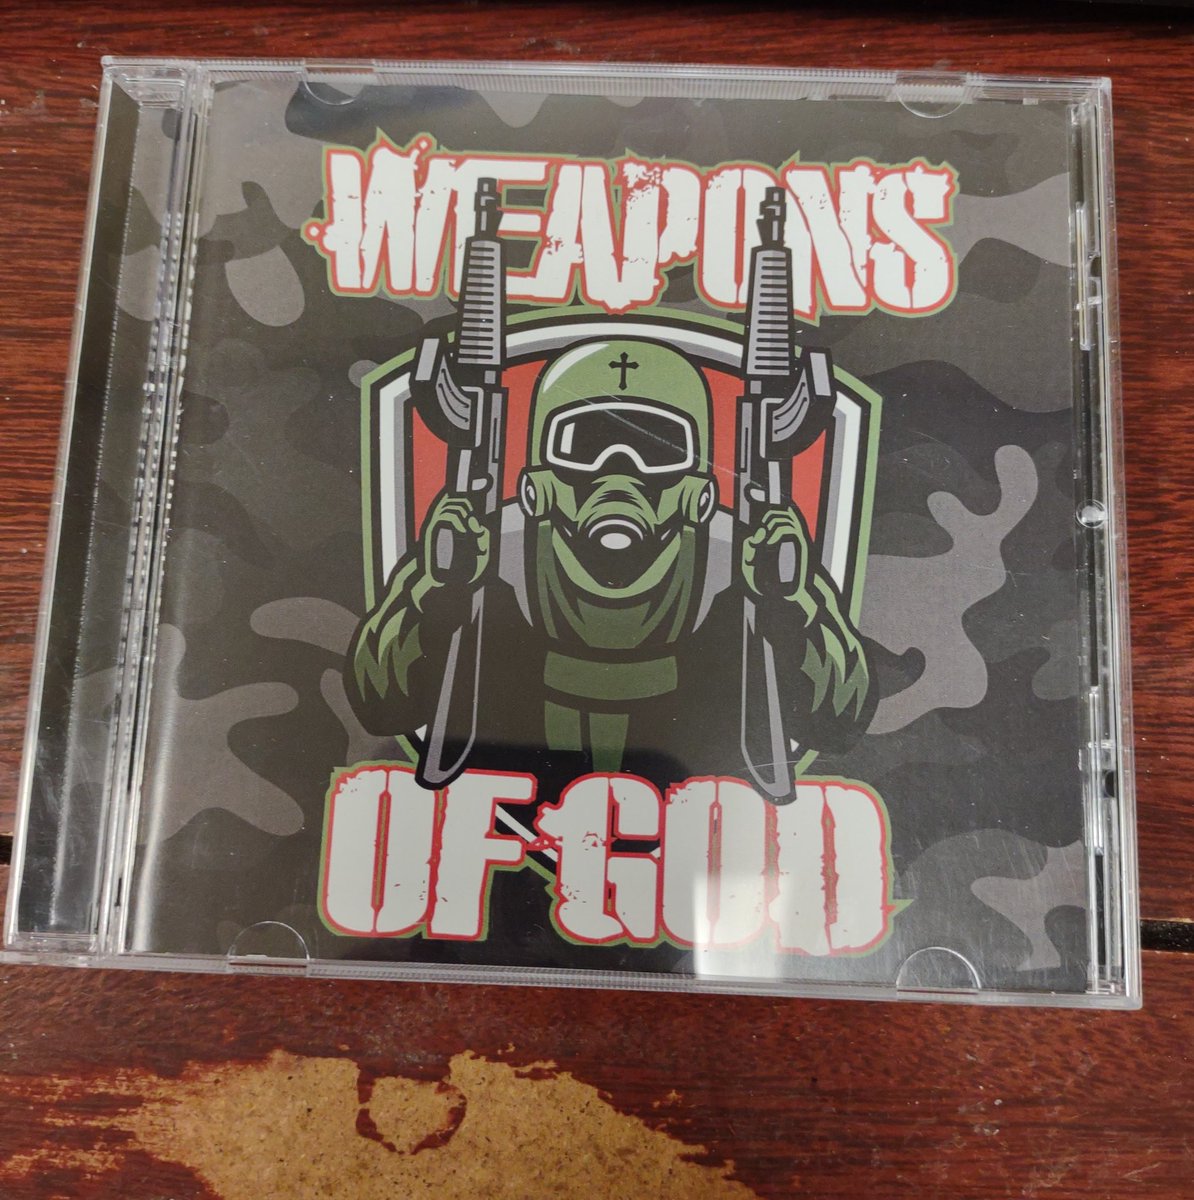 Weapons of God - self titled Ohio based Good heavy rock/metal reminiscent of 80s metal with a little doom, a little grunge sprinkled in 2019 😎😎😎😎